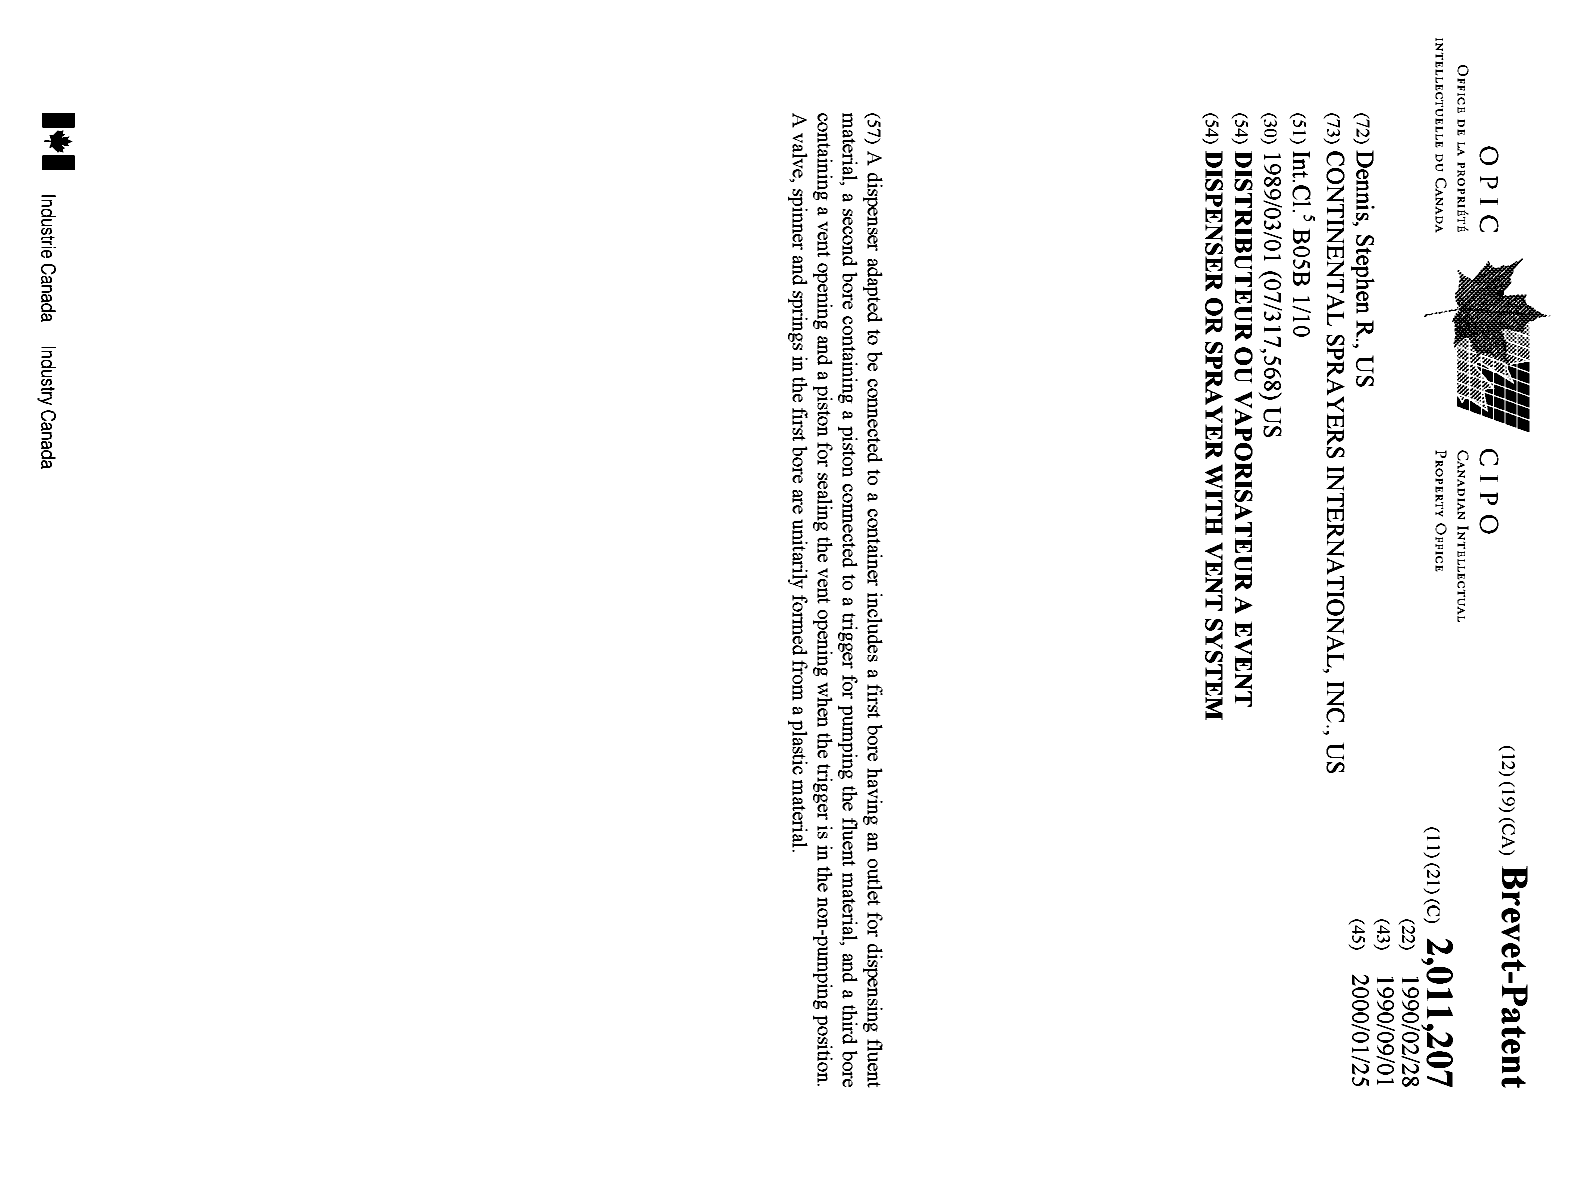 Canadian Patent Document 2011207. Cover Page 20000117. Image 1 of 1